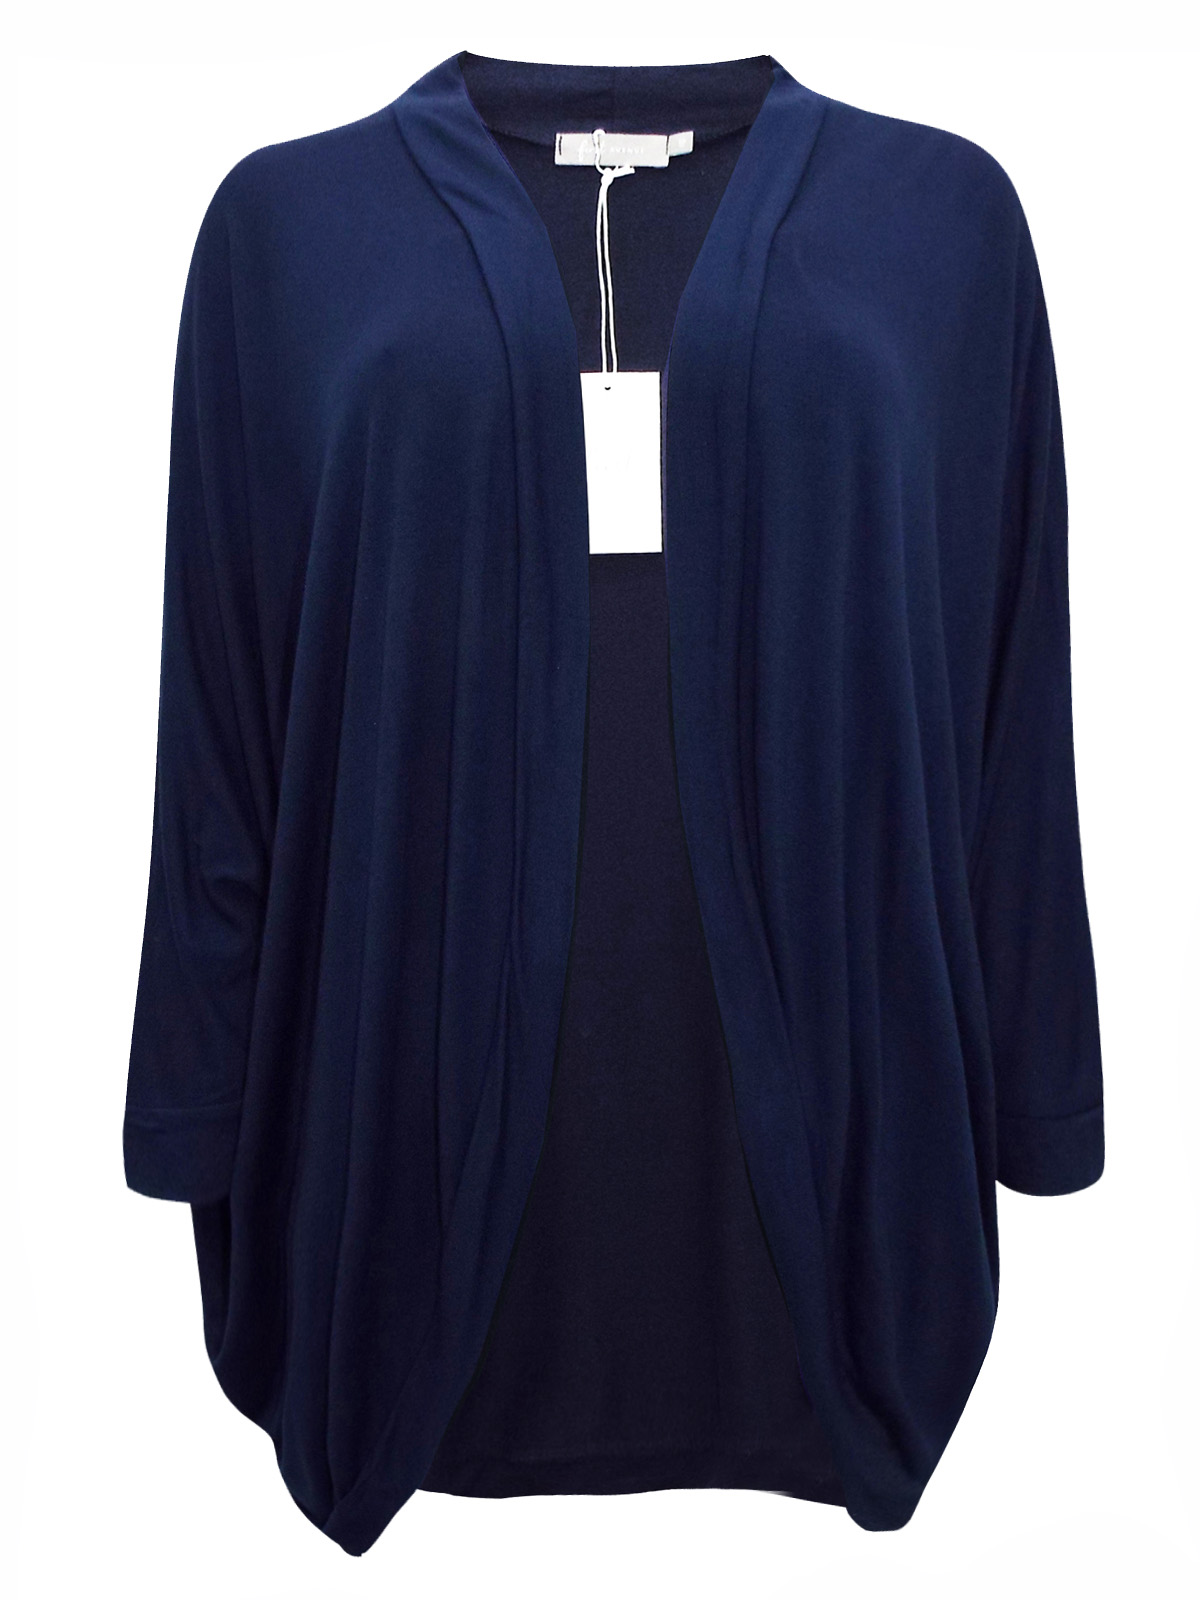 First Avenue NAVY Open Front Jersey Cardigan - Size 10 to 20